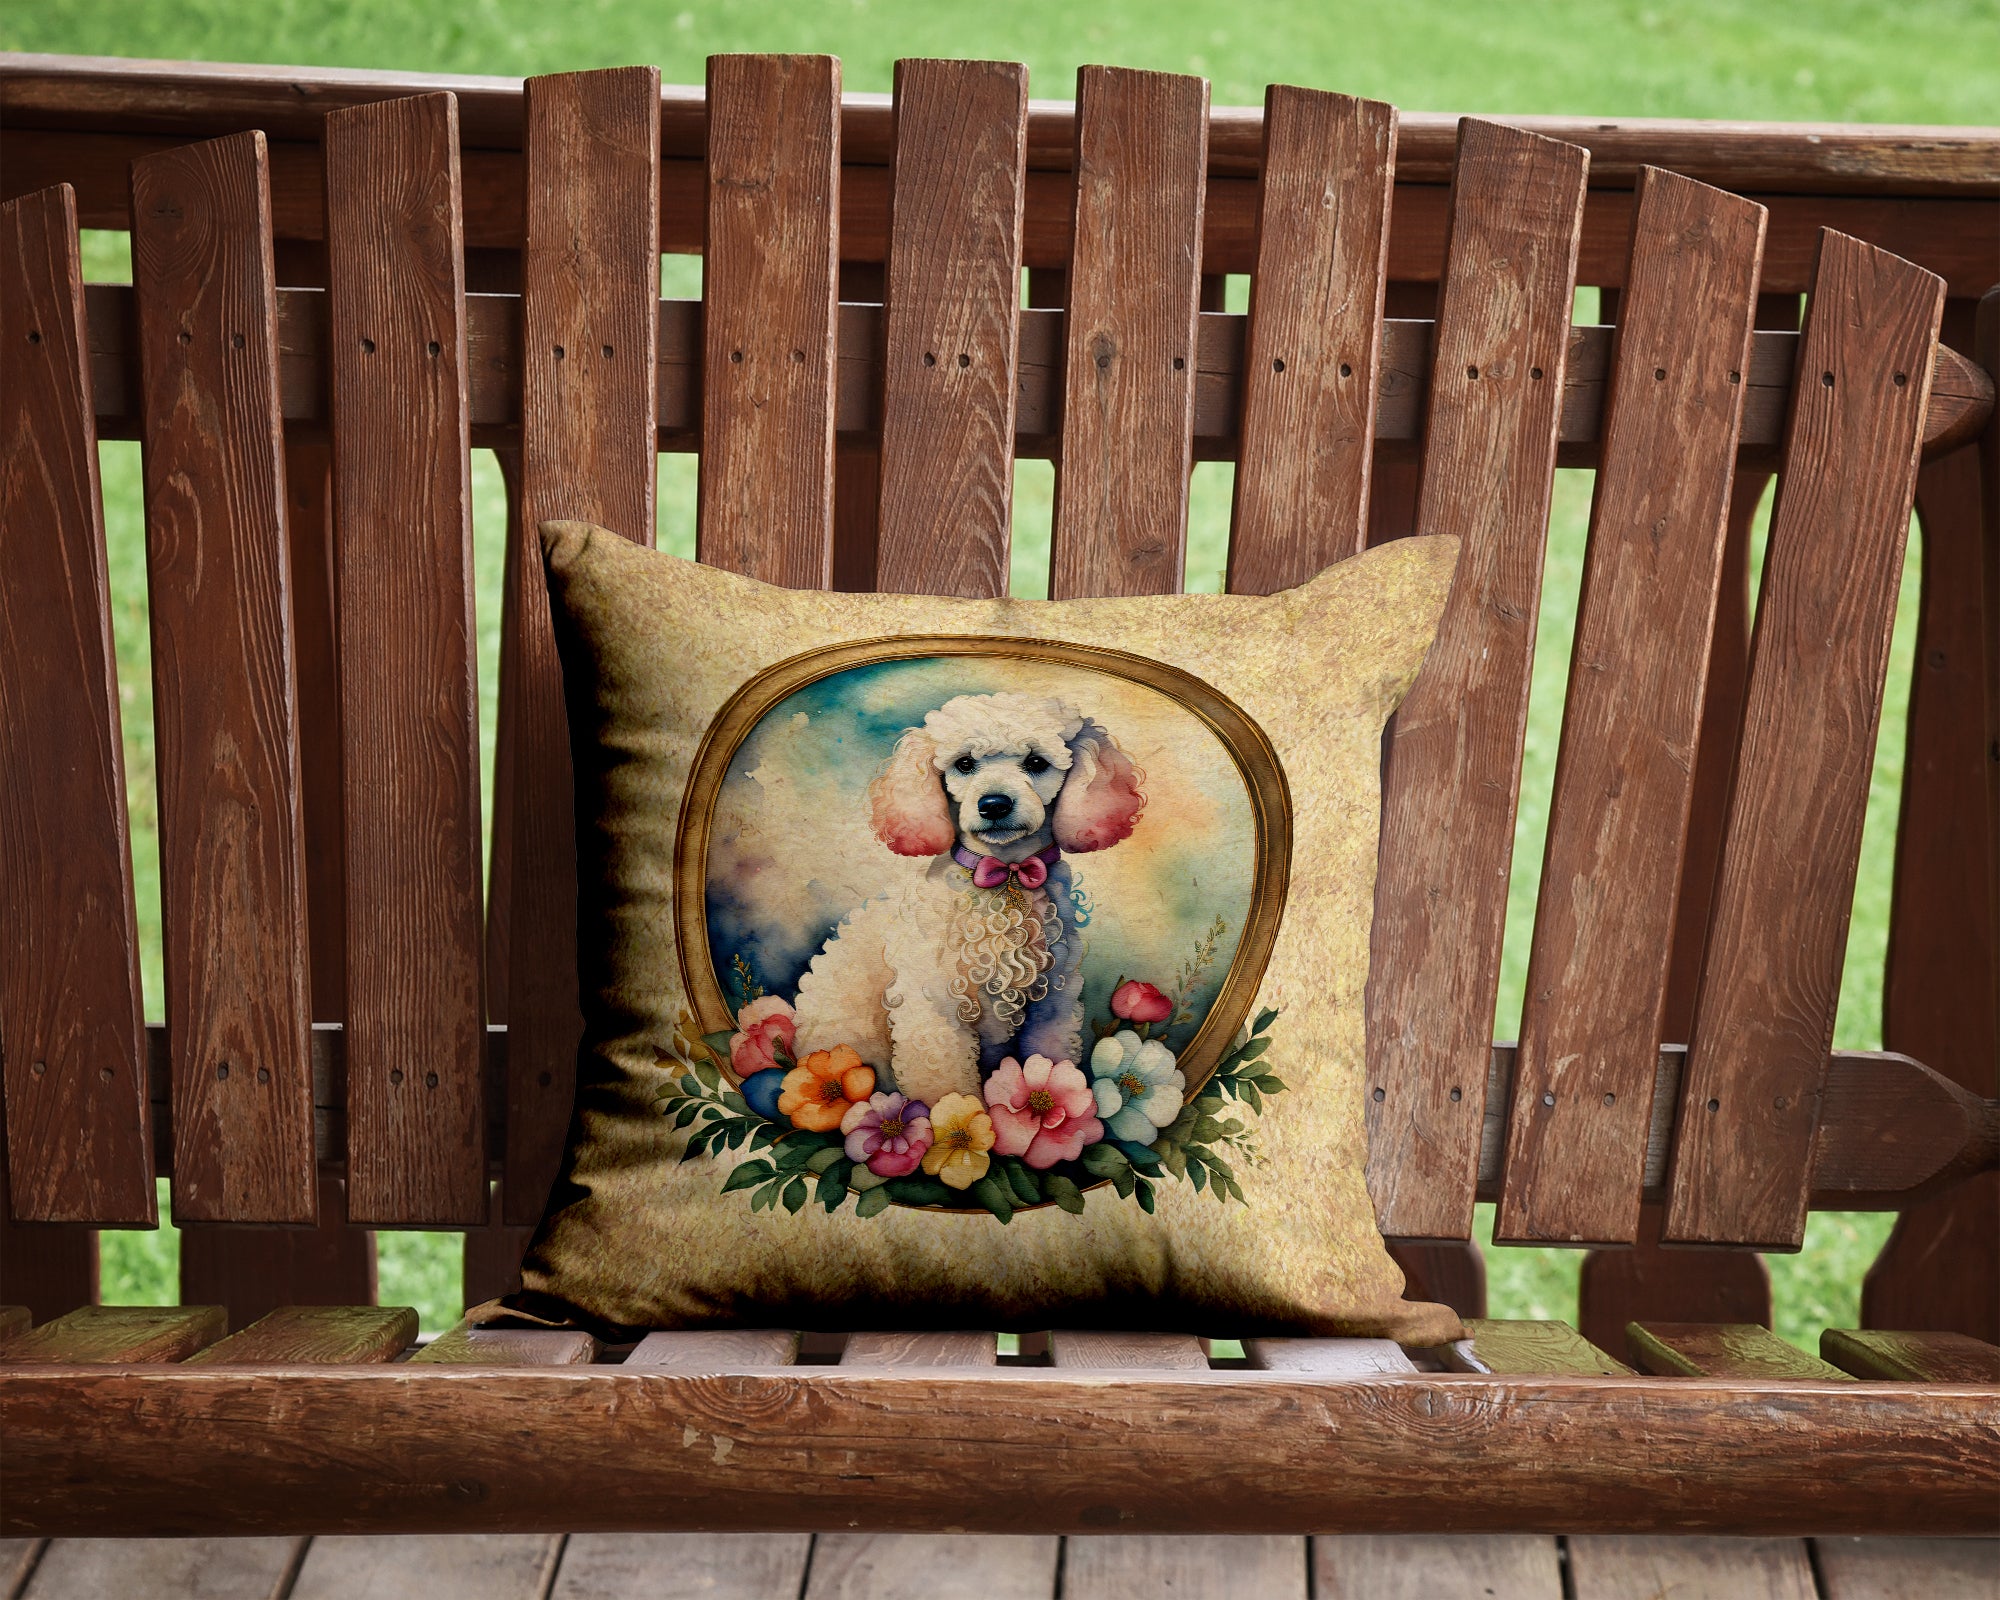 Buy this White Poodle and Flowers Fabric Decorative Pillow